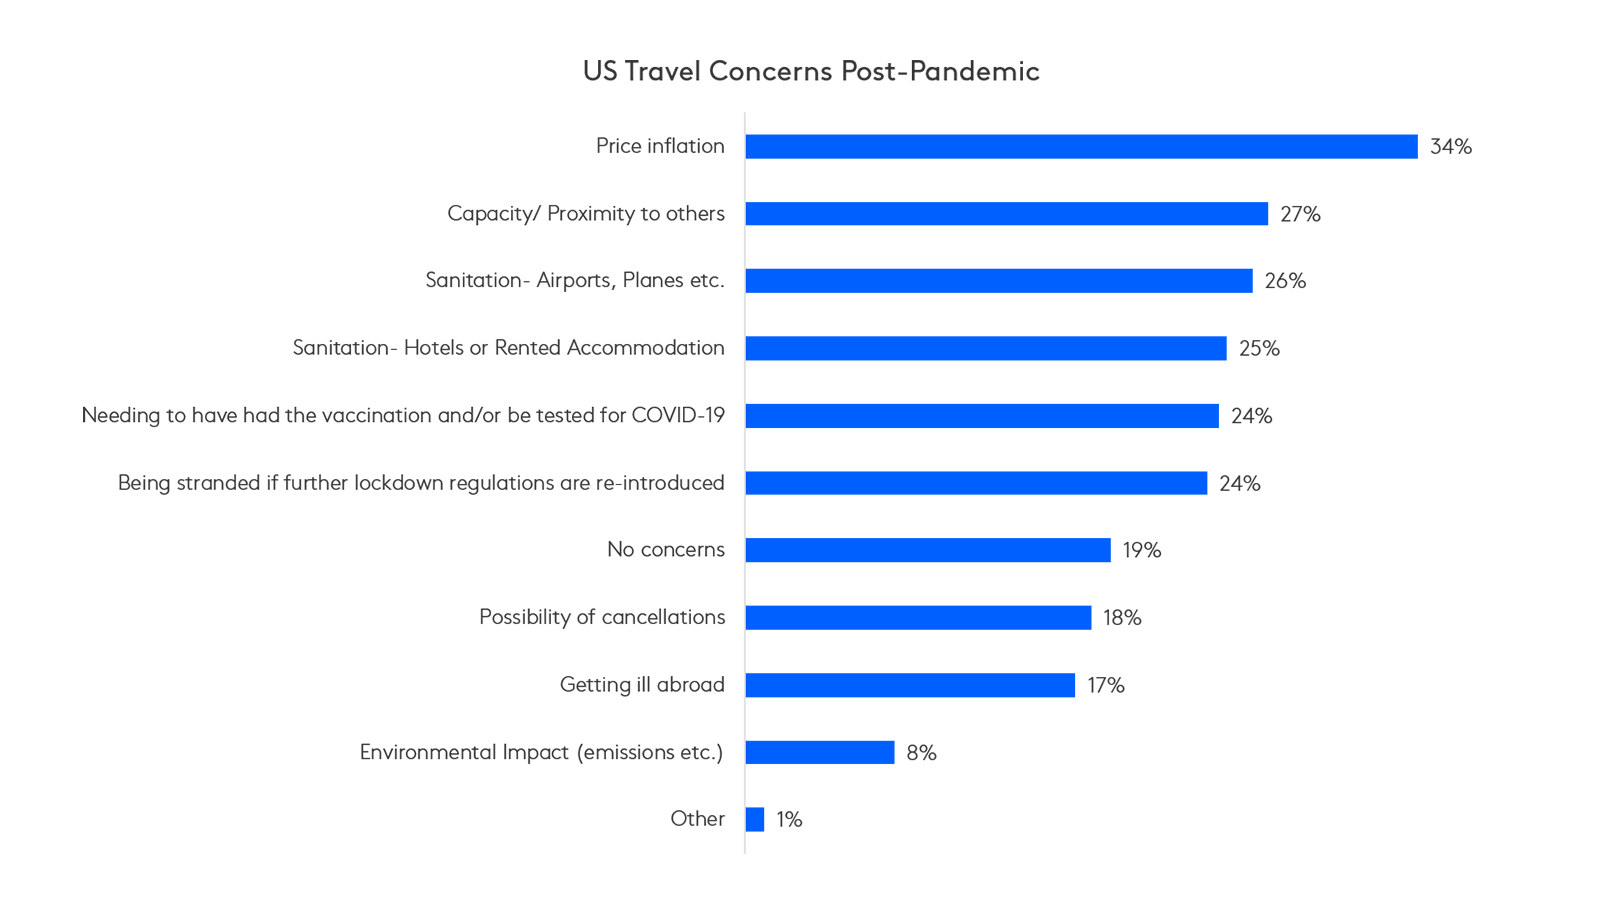 Top travel concerns for Americans